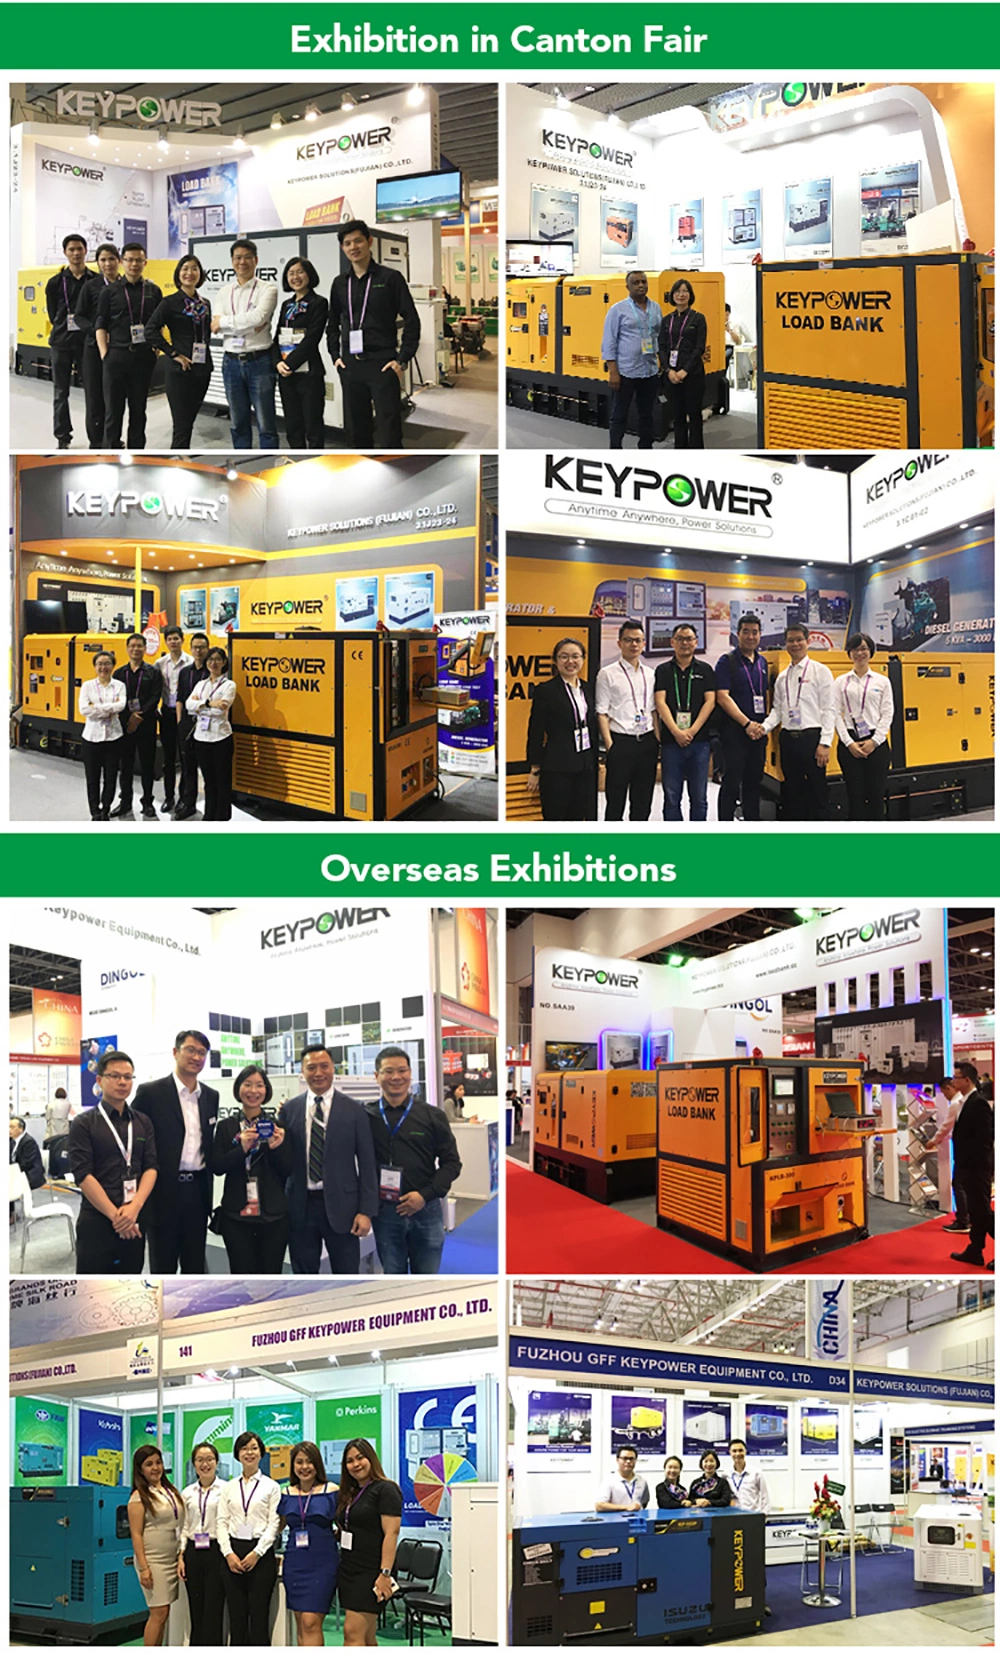 34kw 43 kVA 40 Kw 50 kVA New Design 3 Phase 380V Water Cooled Sound Proof Type Genset 50kw Diesel Generator Factory